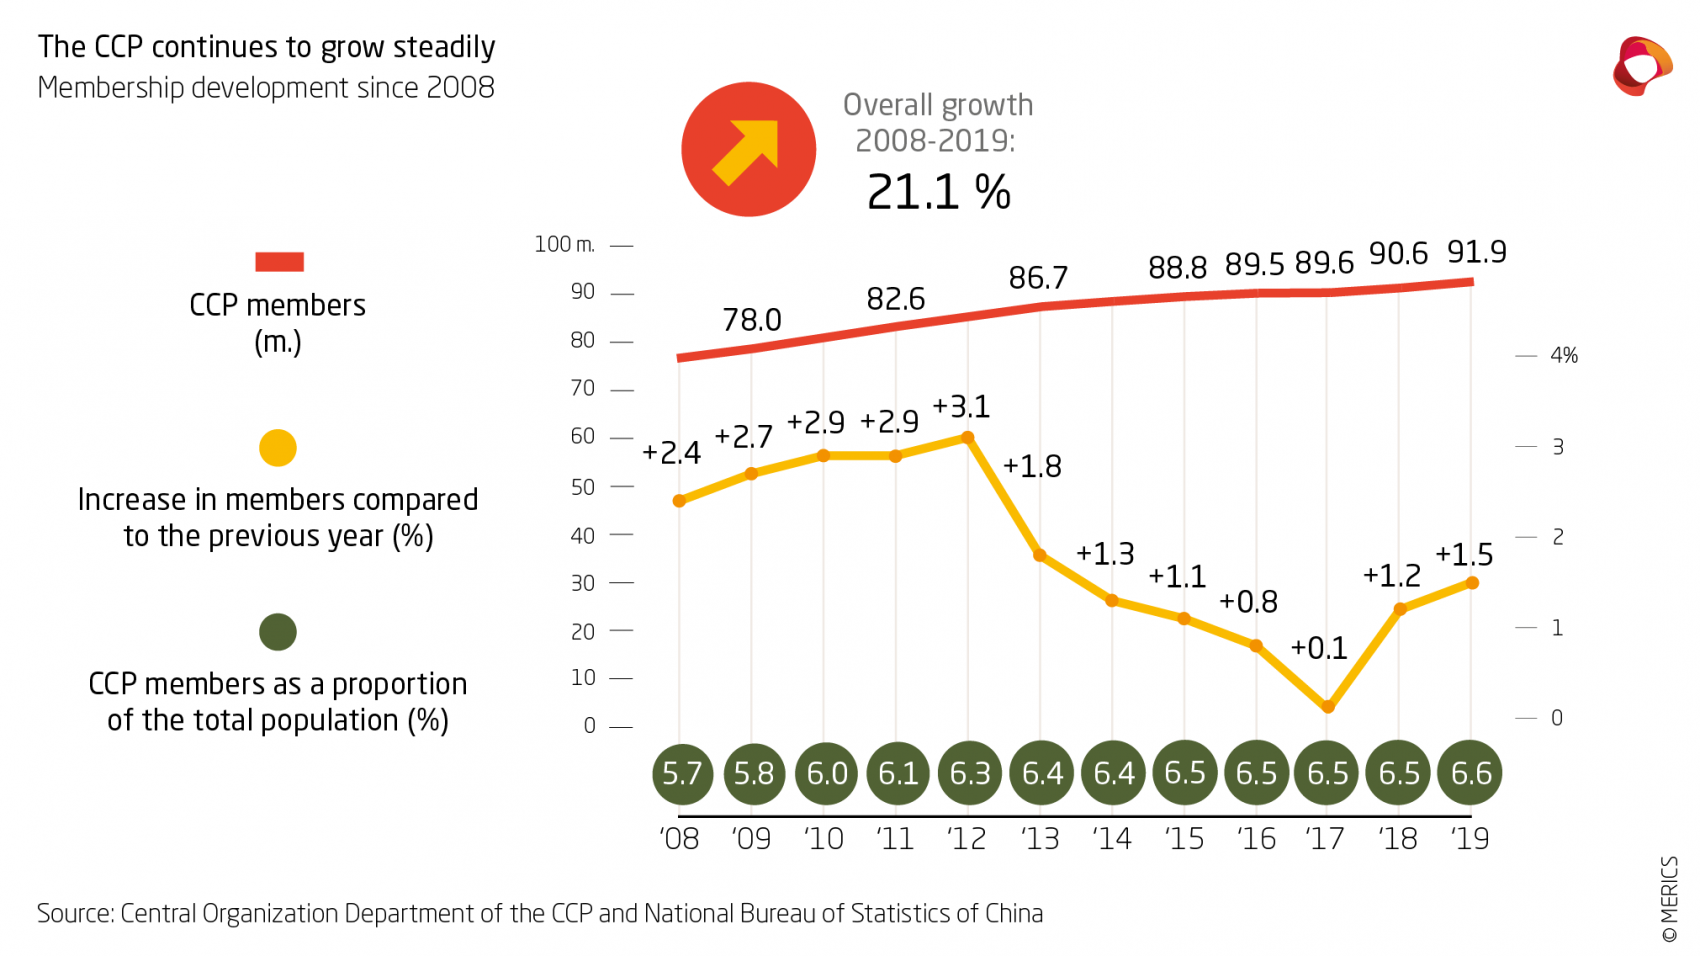 The CCP continues to grow steadily